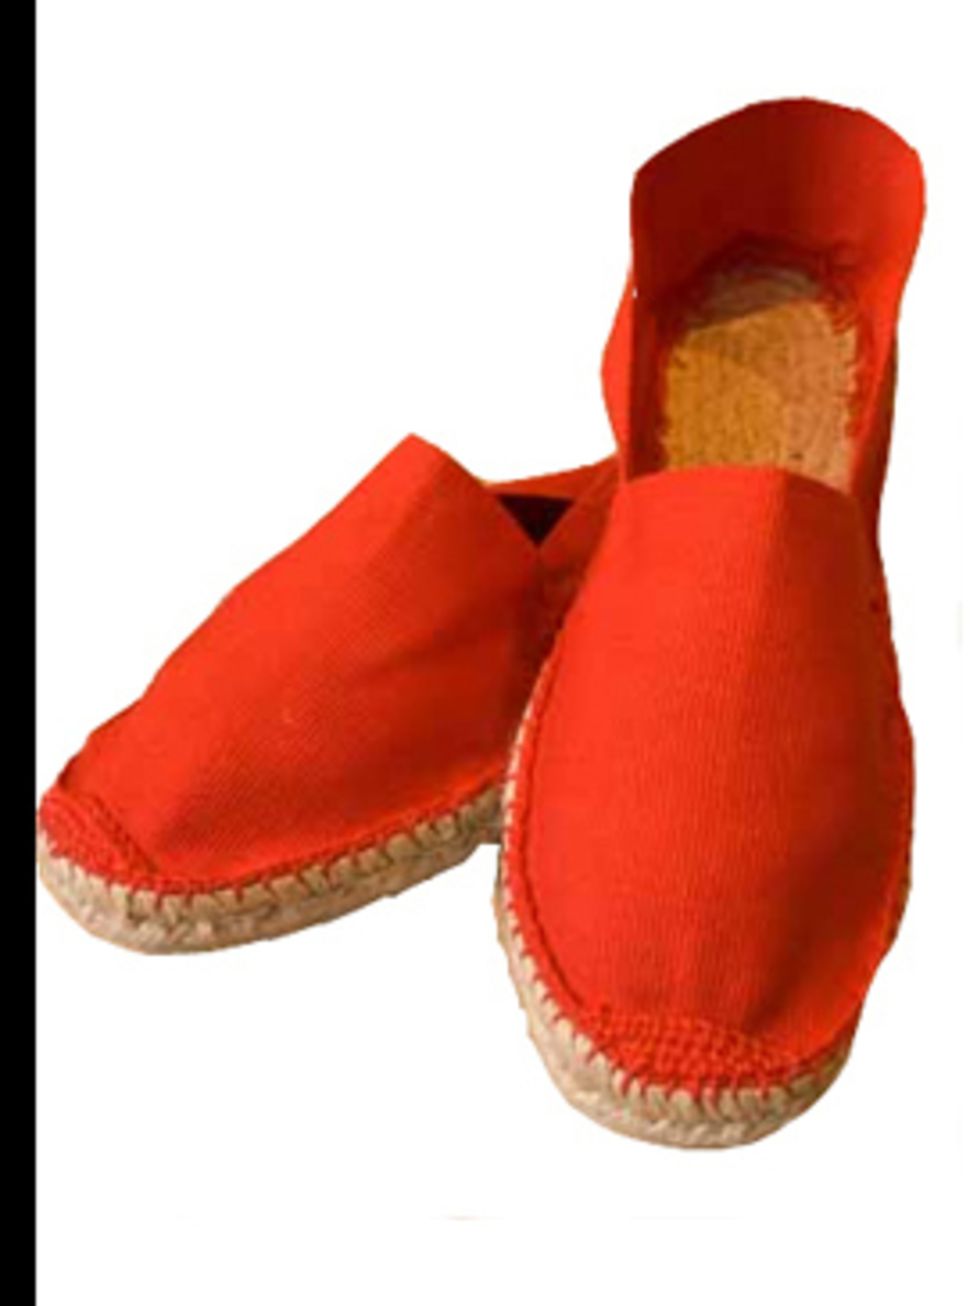 <p>Rouge Espadrille, £15.00 from <a href="http://www.espadrille.co.uk/proddetail.php?prod=10010009">Espadrille.co.uk</a></p>